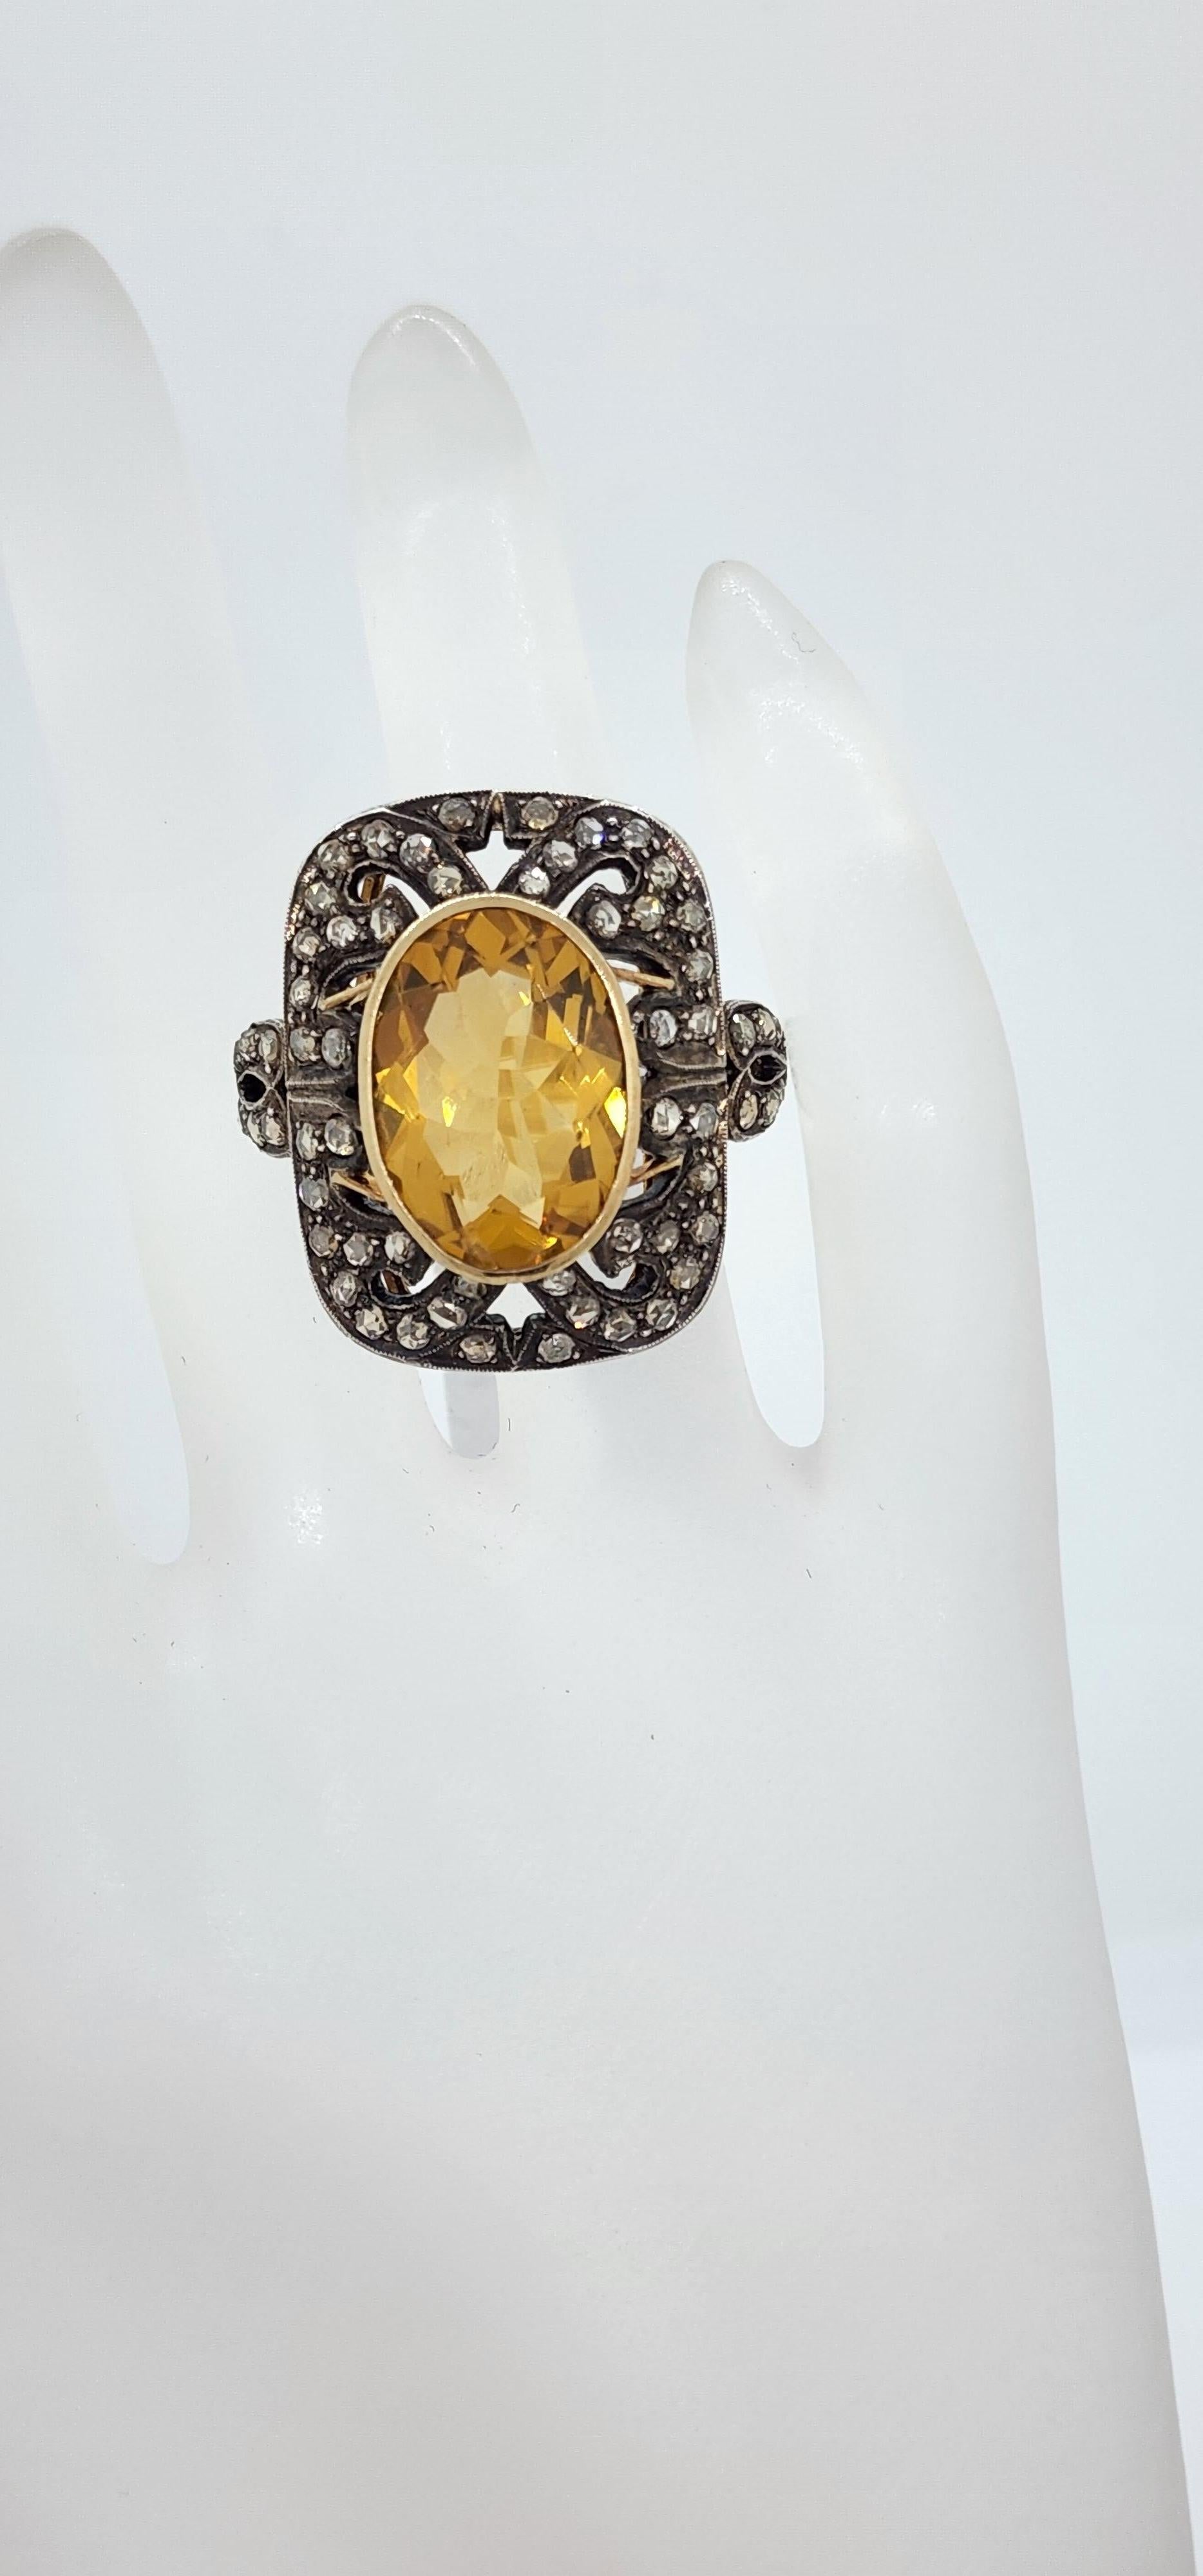  Citrine and Diamond Rose Cut Cocktail Ring in 14k and Black Rhodium For Sale 2